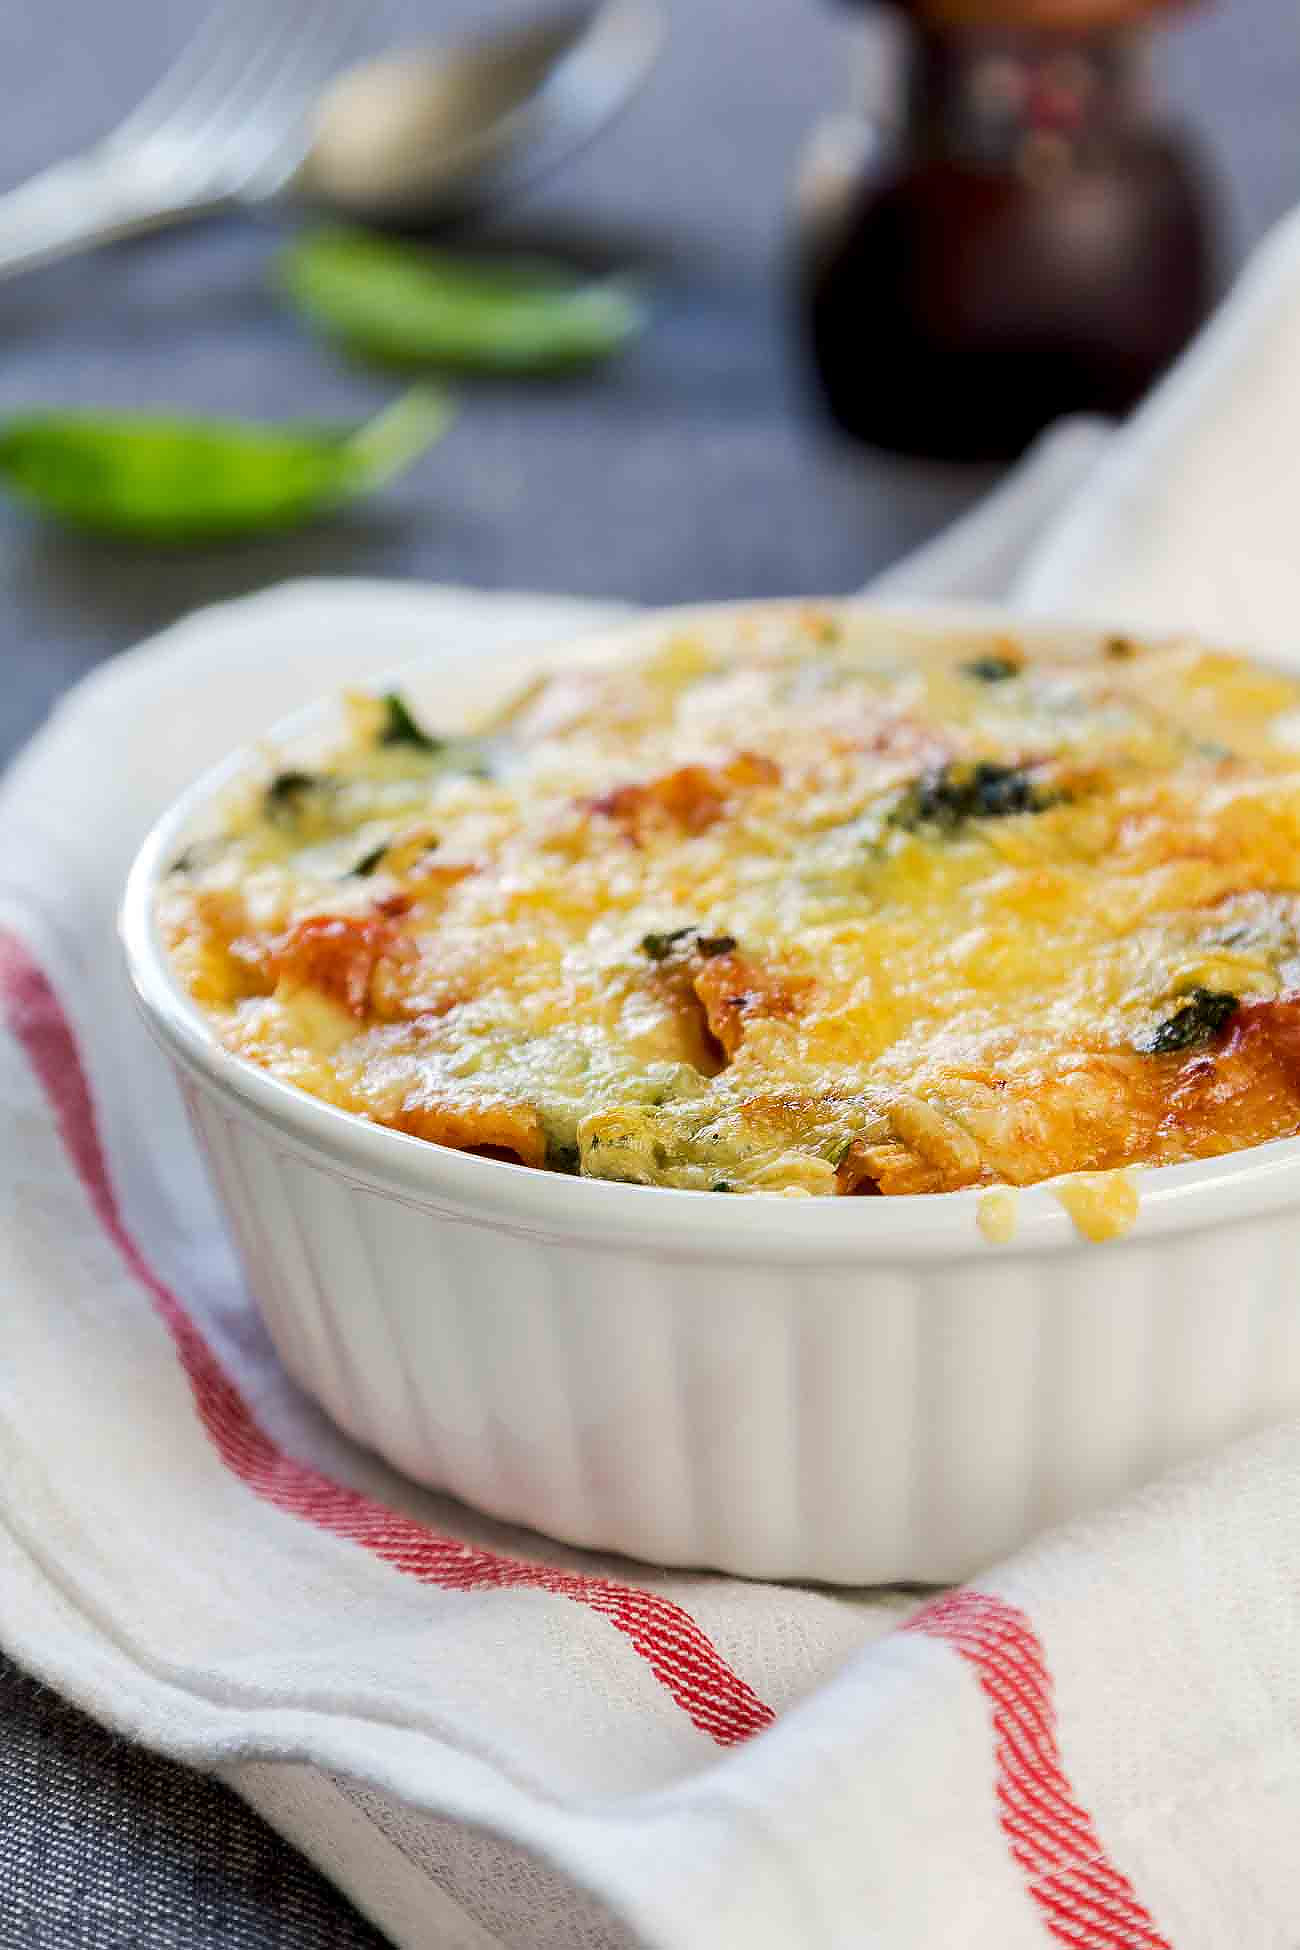 Baked Pasta Recipe with Paneer and Spinach